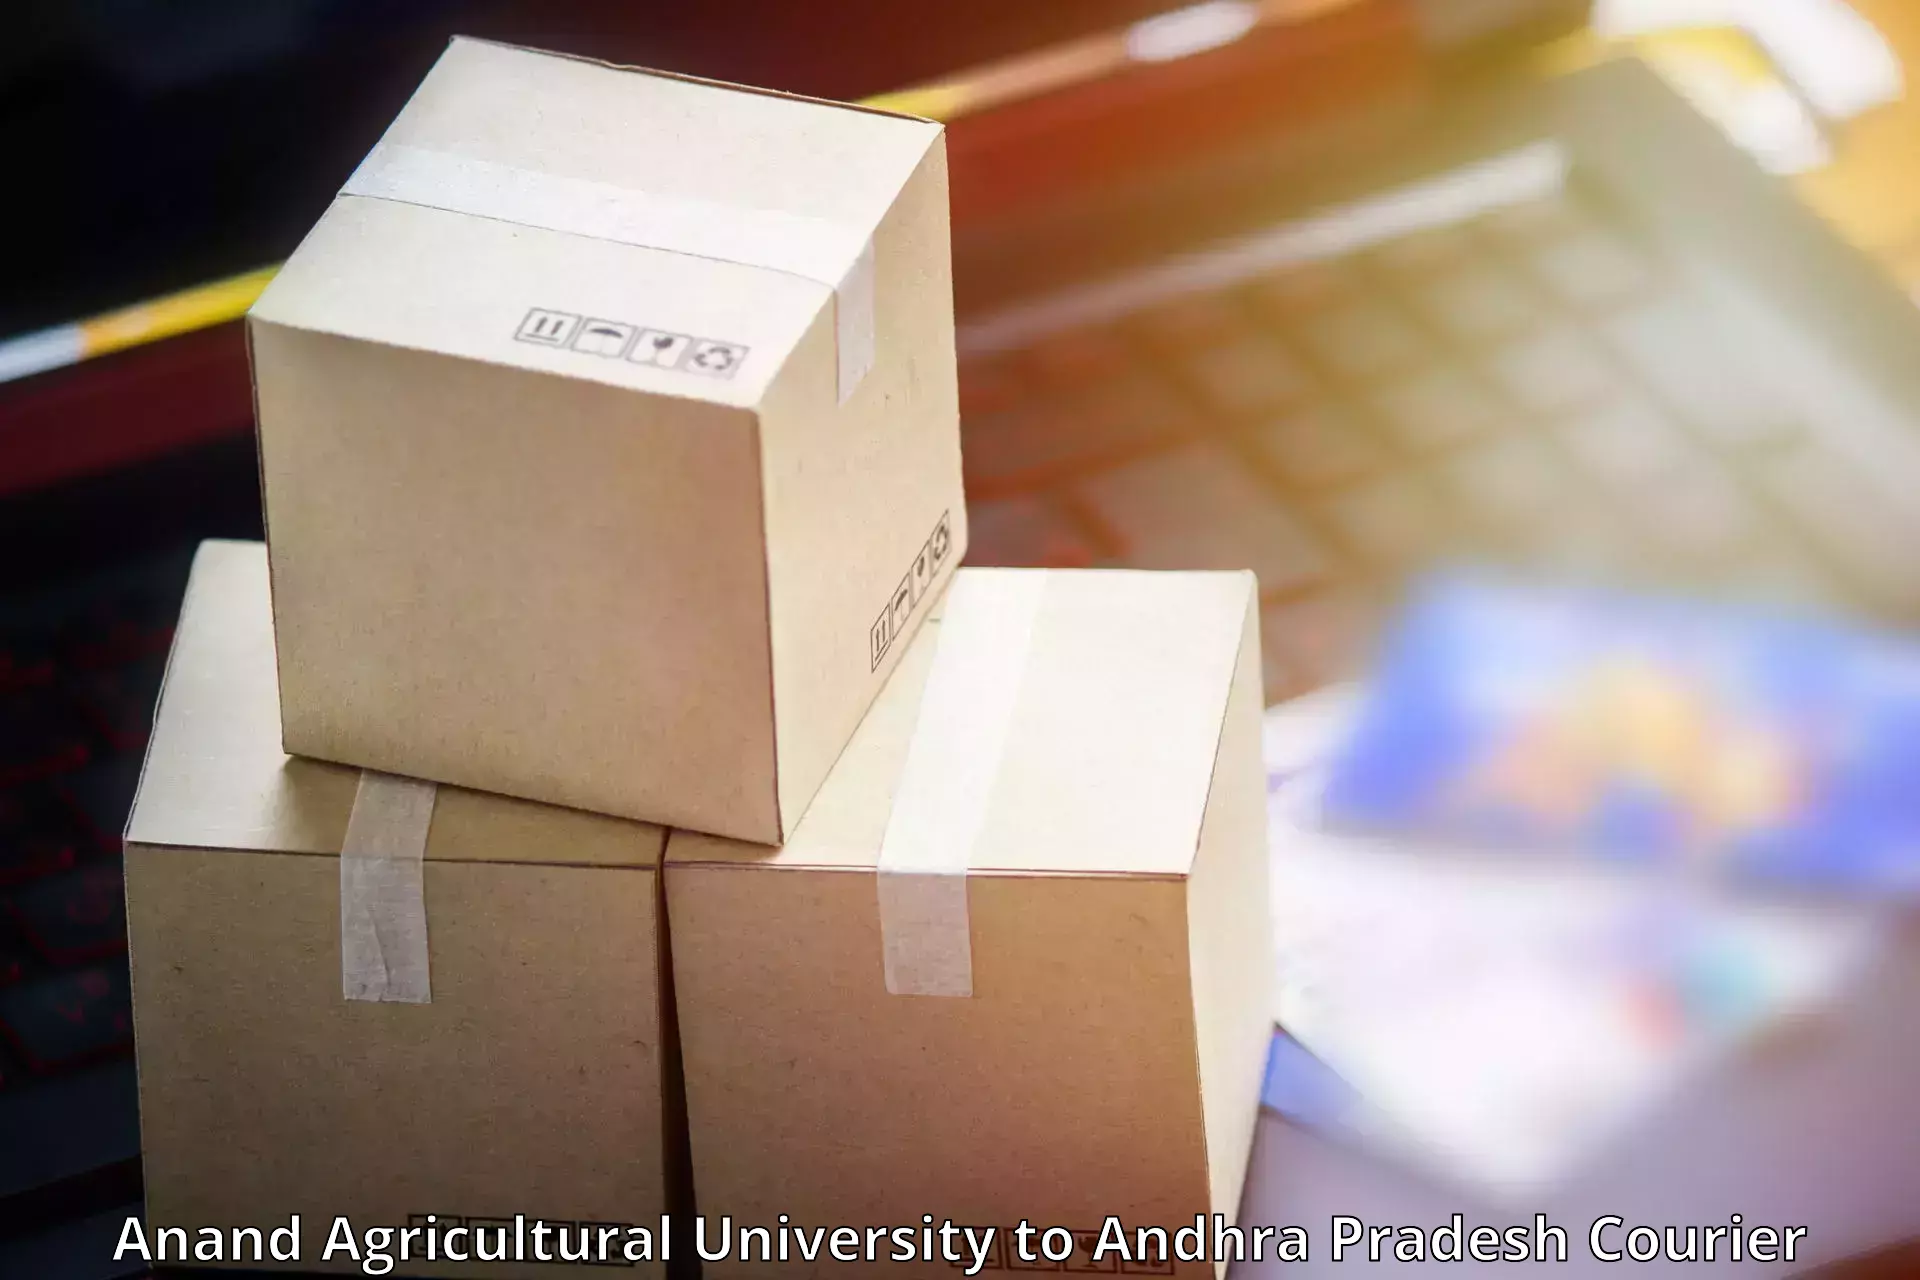 State-of-the-art courier technology Anand Agricultural University to Kavitam